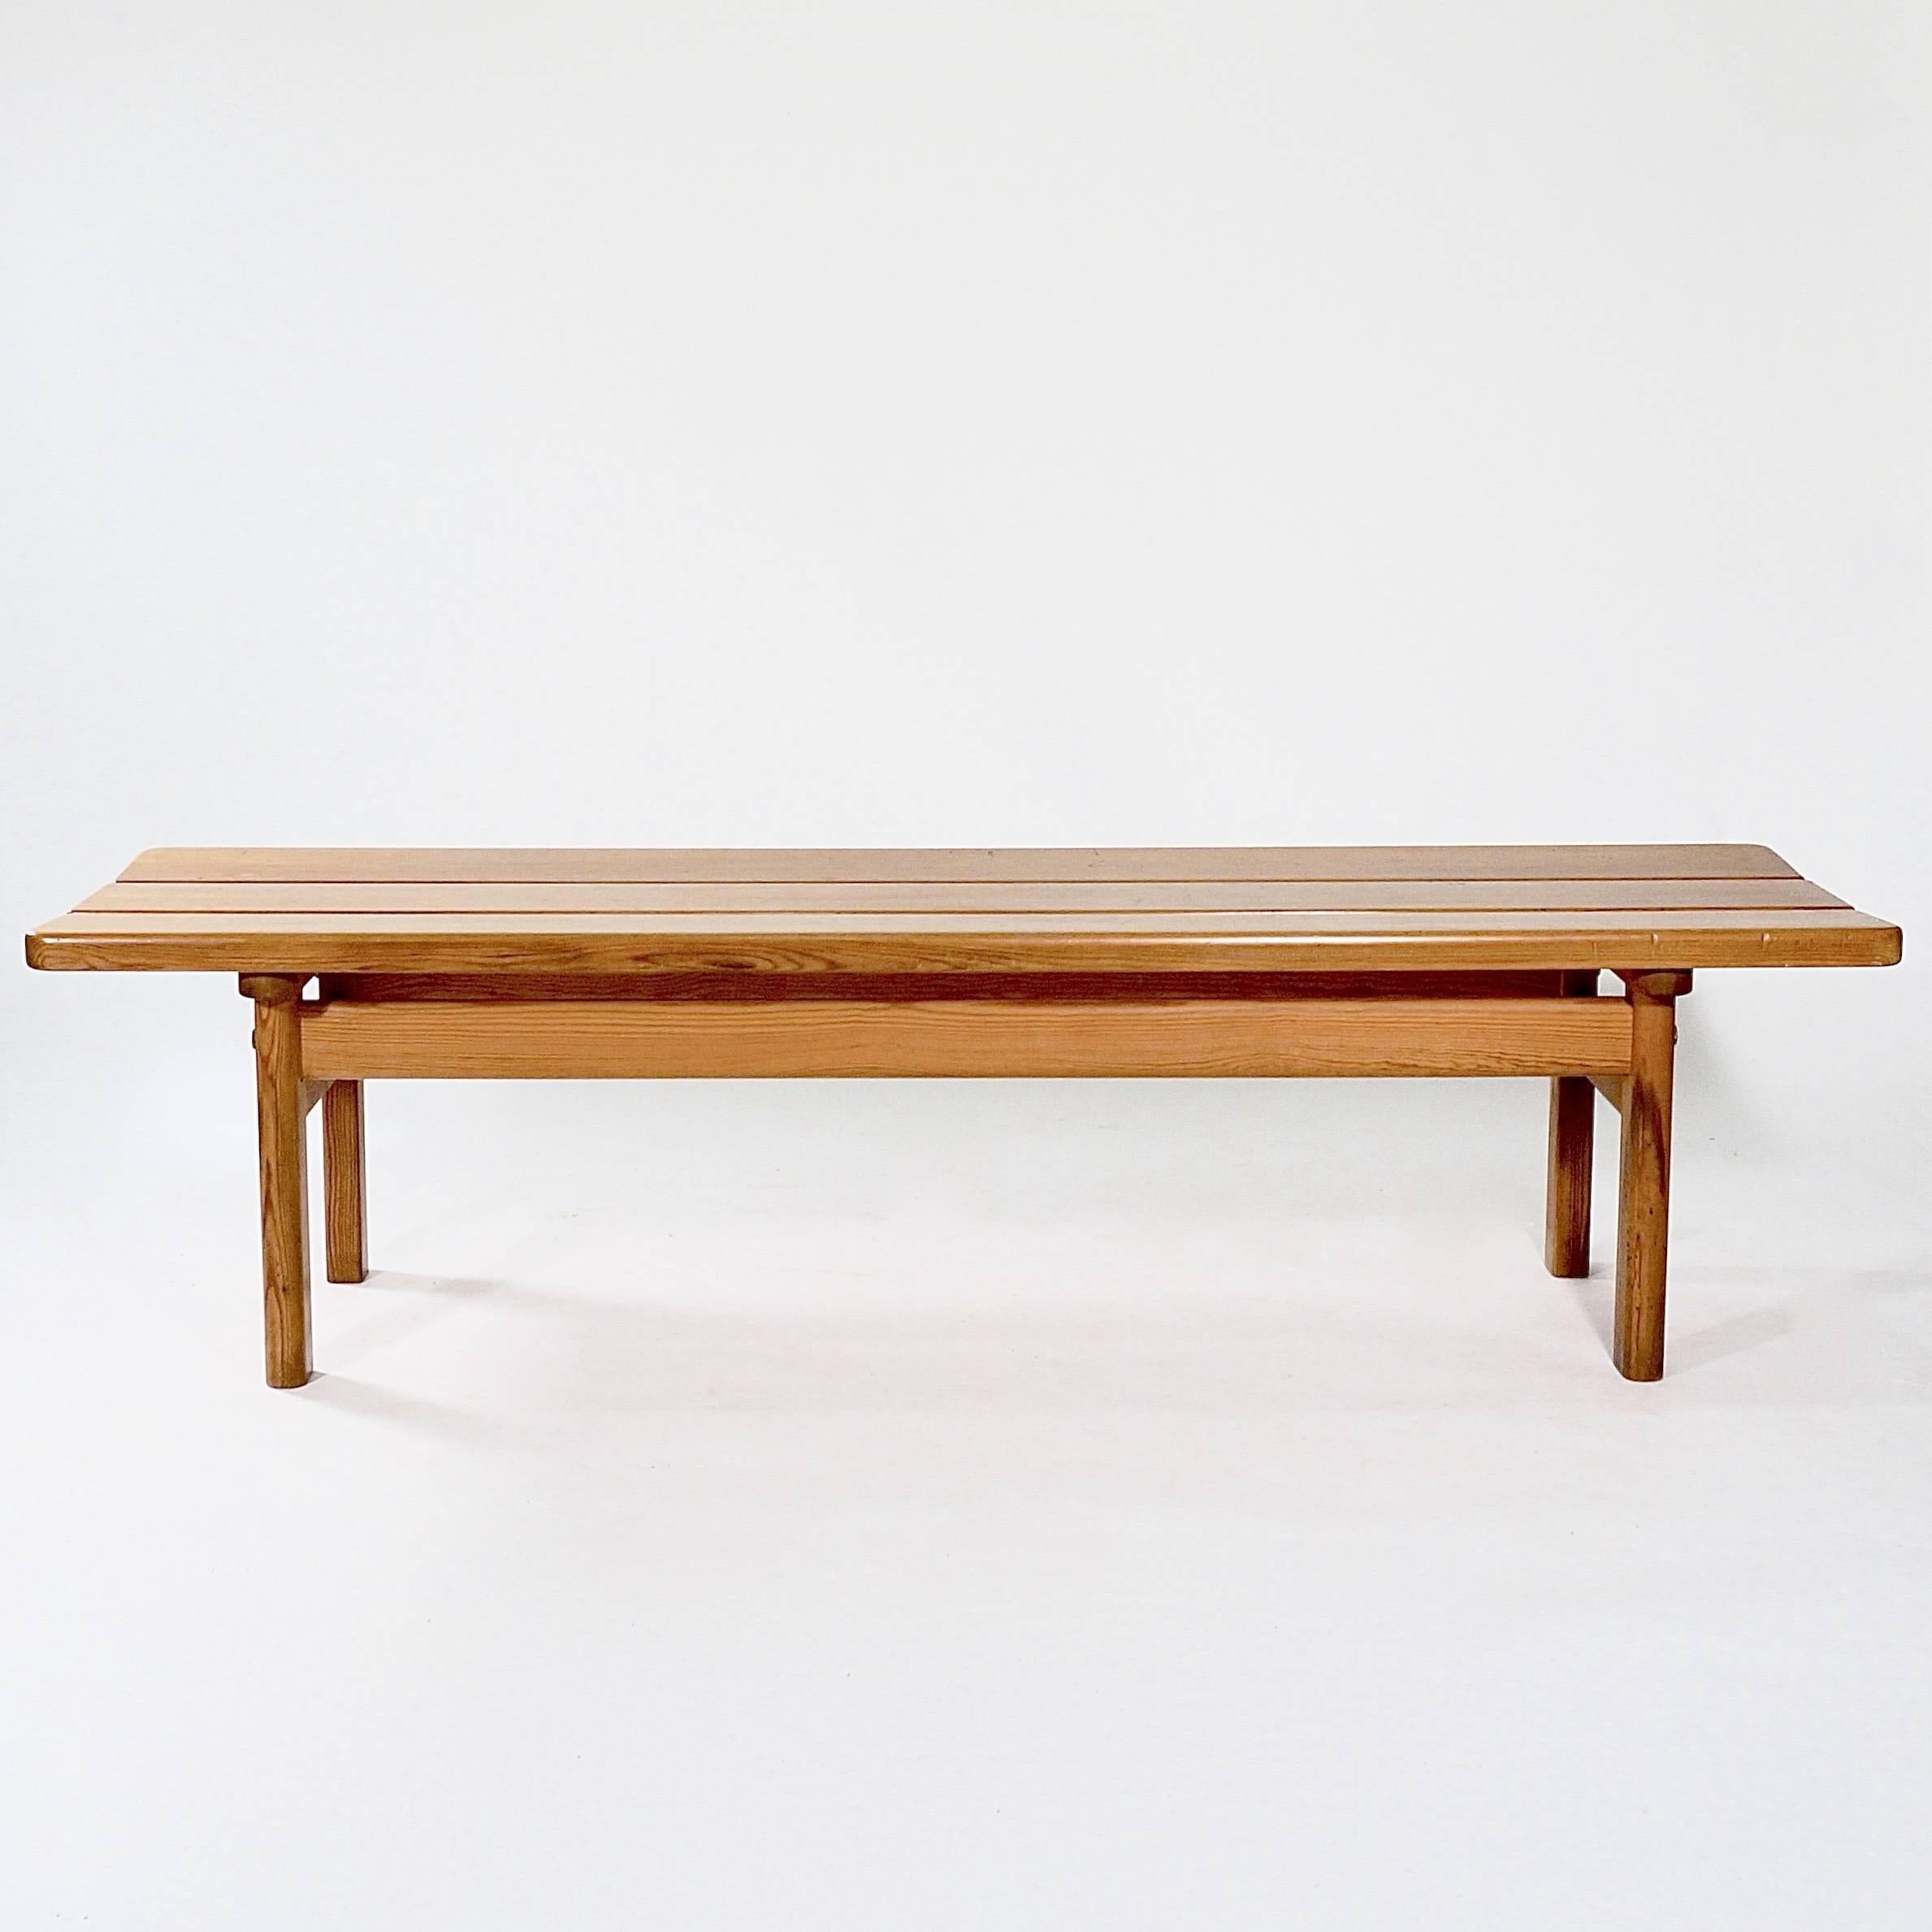 A pitch pine coffee table with a three plank top and simple legs and stretchers. Manufactured by Karl Andersson. Stamped Karl Andersson's.

Sweden, designed 1961.